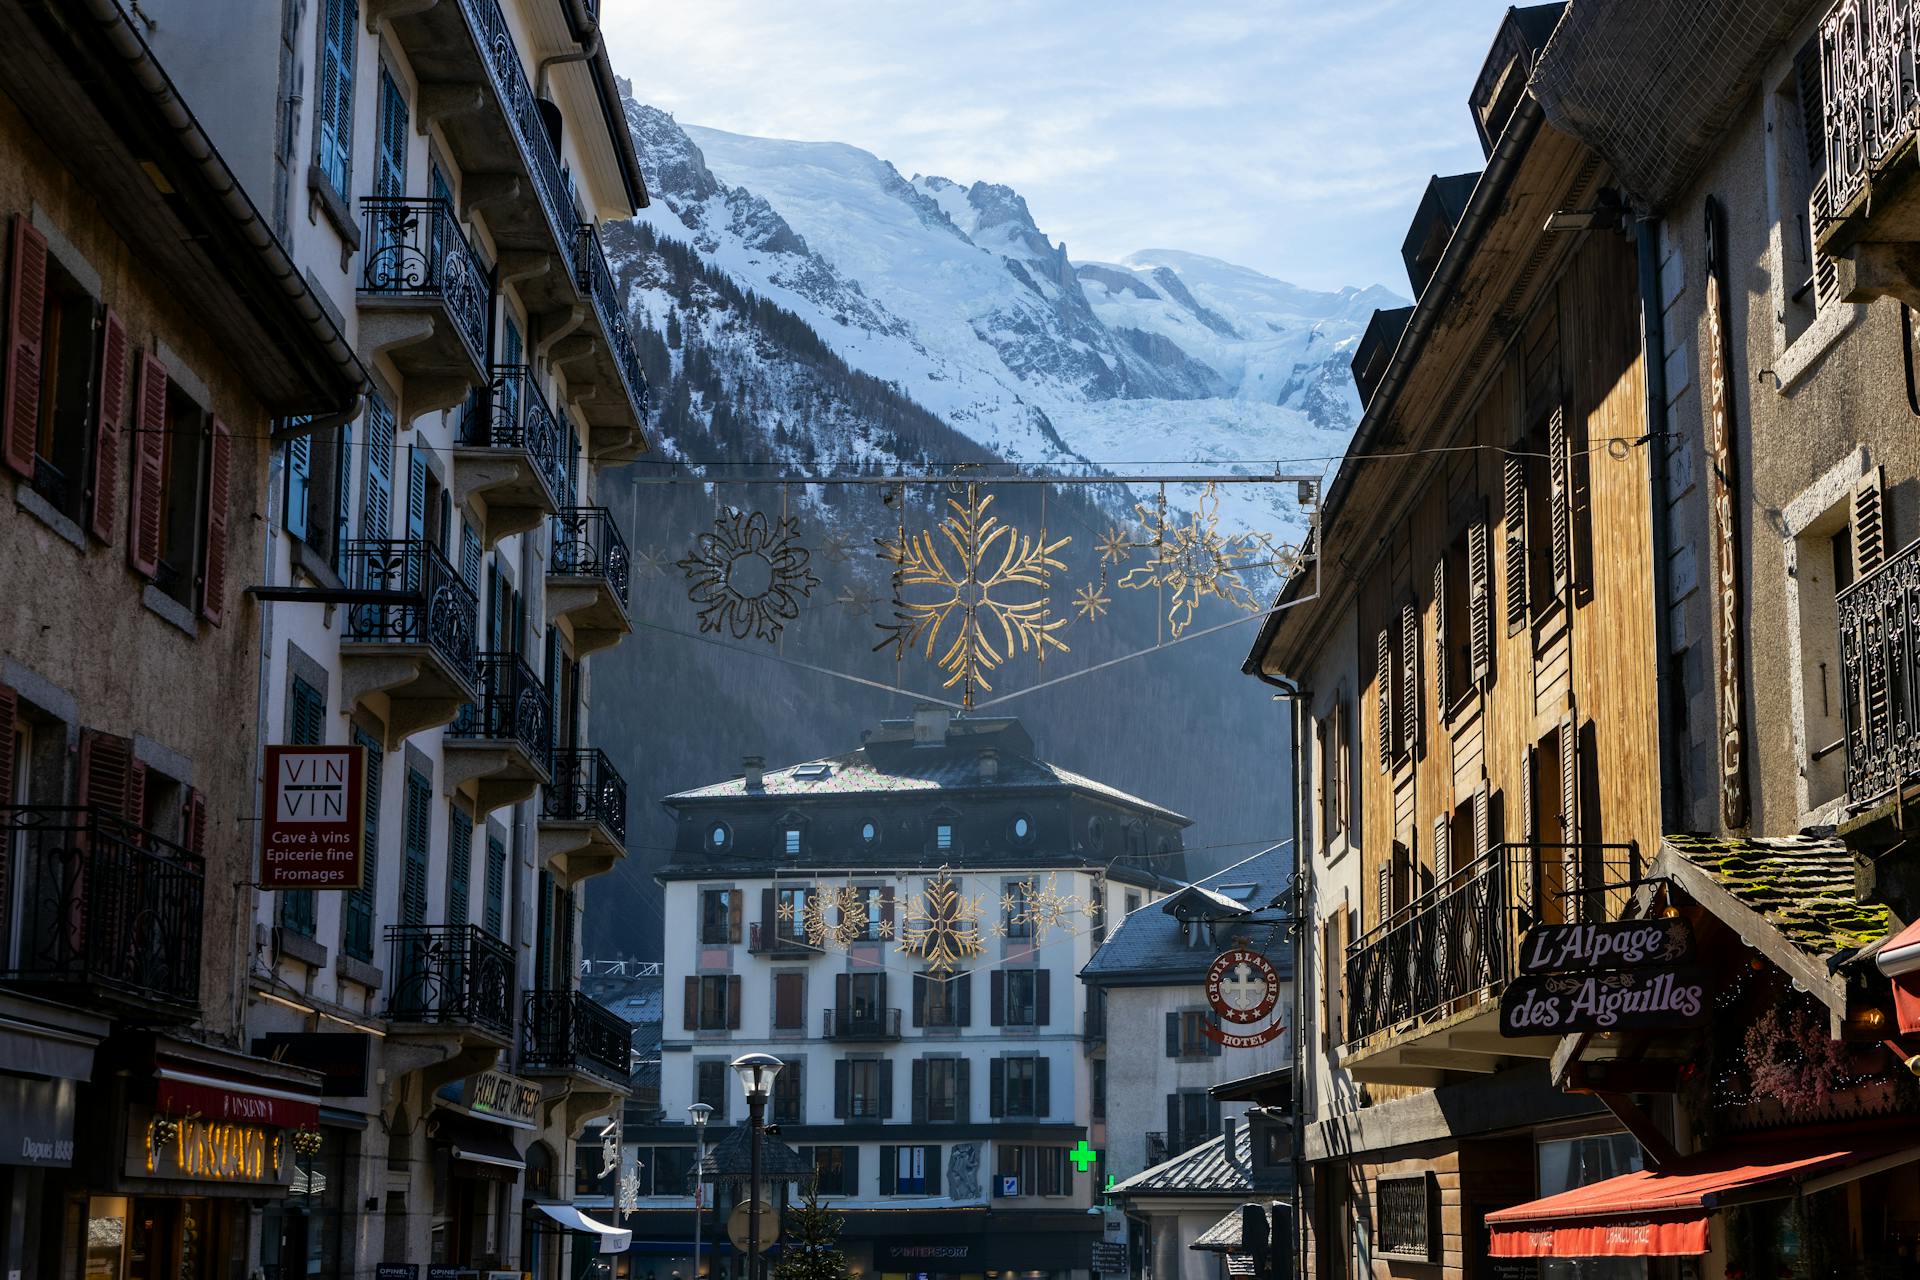 A beautiful shot of Chamonix town and the mountains